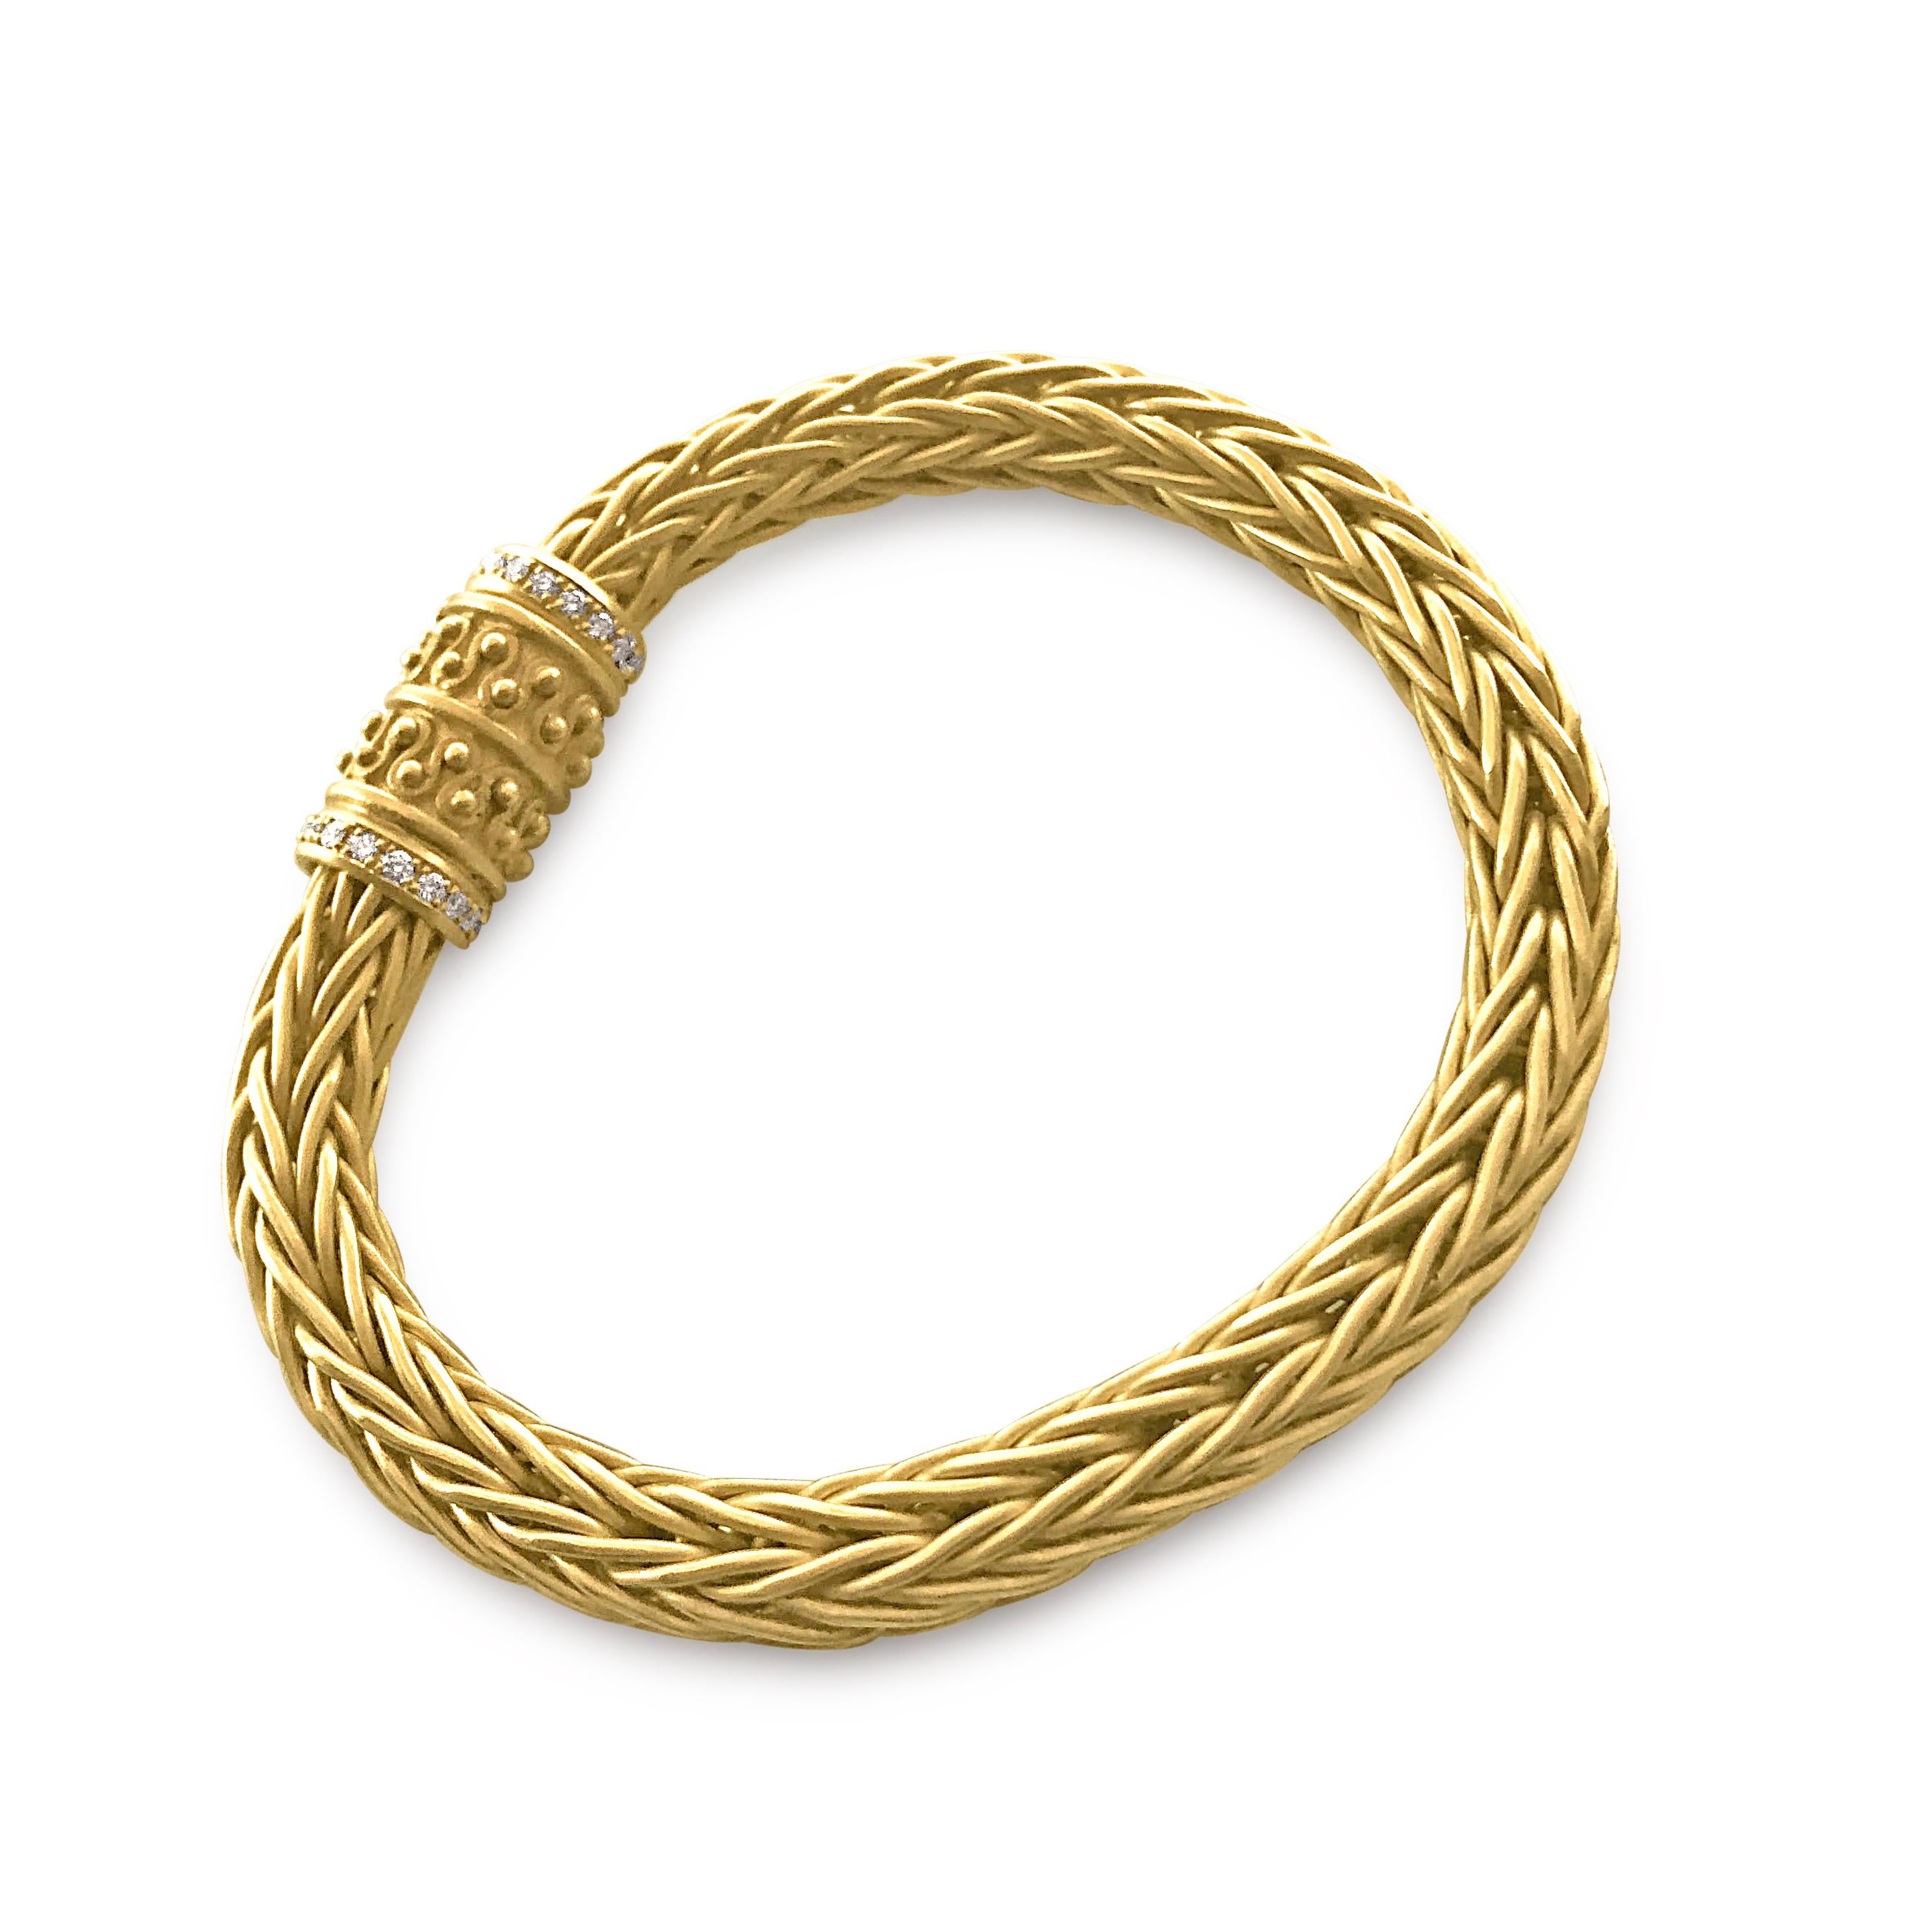 The Etruscans are recognized around the world for the mastery of their goldsmiths. Since the founding of their society, the Etruscan civilization has specialized in the ancient practice of gold granulation - a refined and elegant technique of